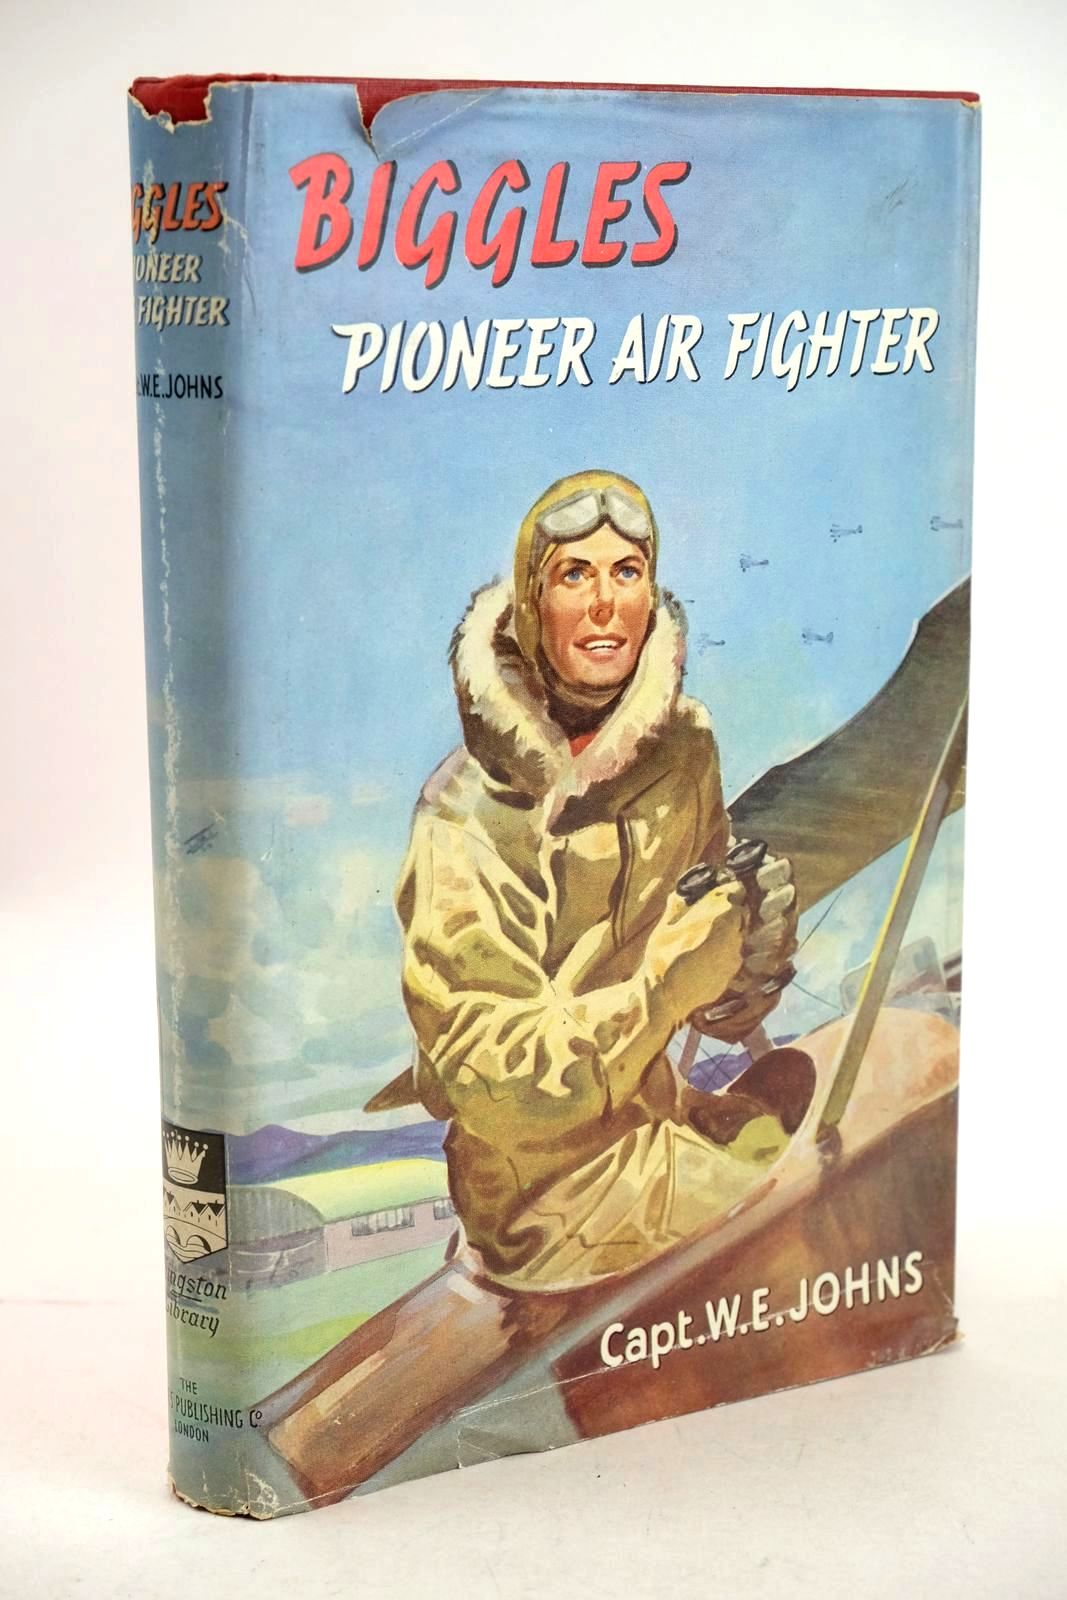 Photo of BIGGLES PIONEER AIR FIGHTER written by Johns, W.E. published by Thames Publishing Co. (STOCK CODE: 1326560)  for sale by Stella & Rose's Books